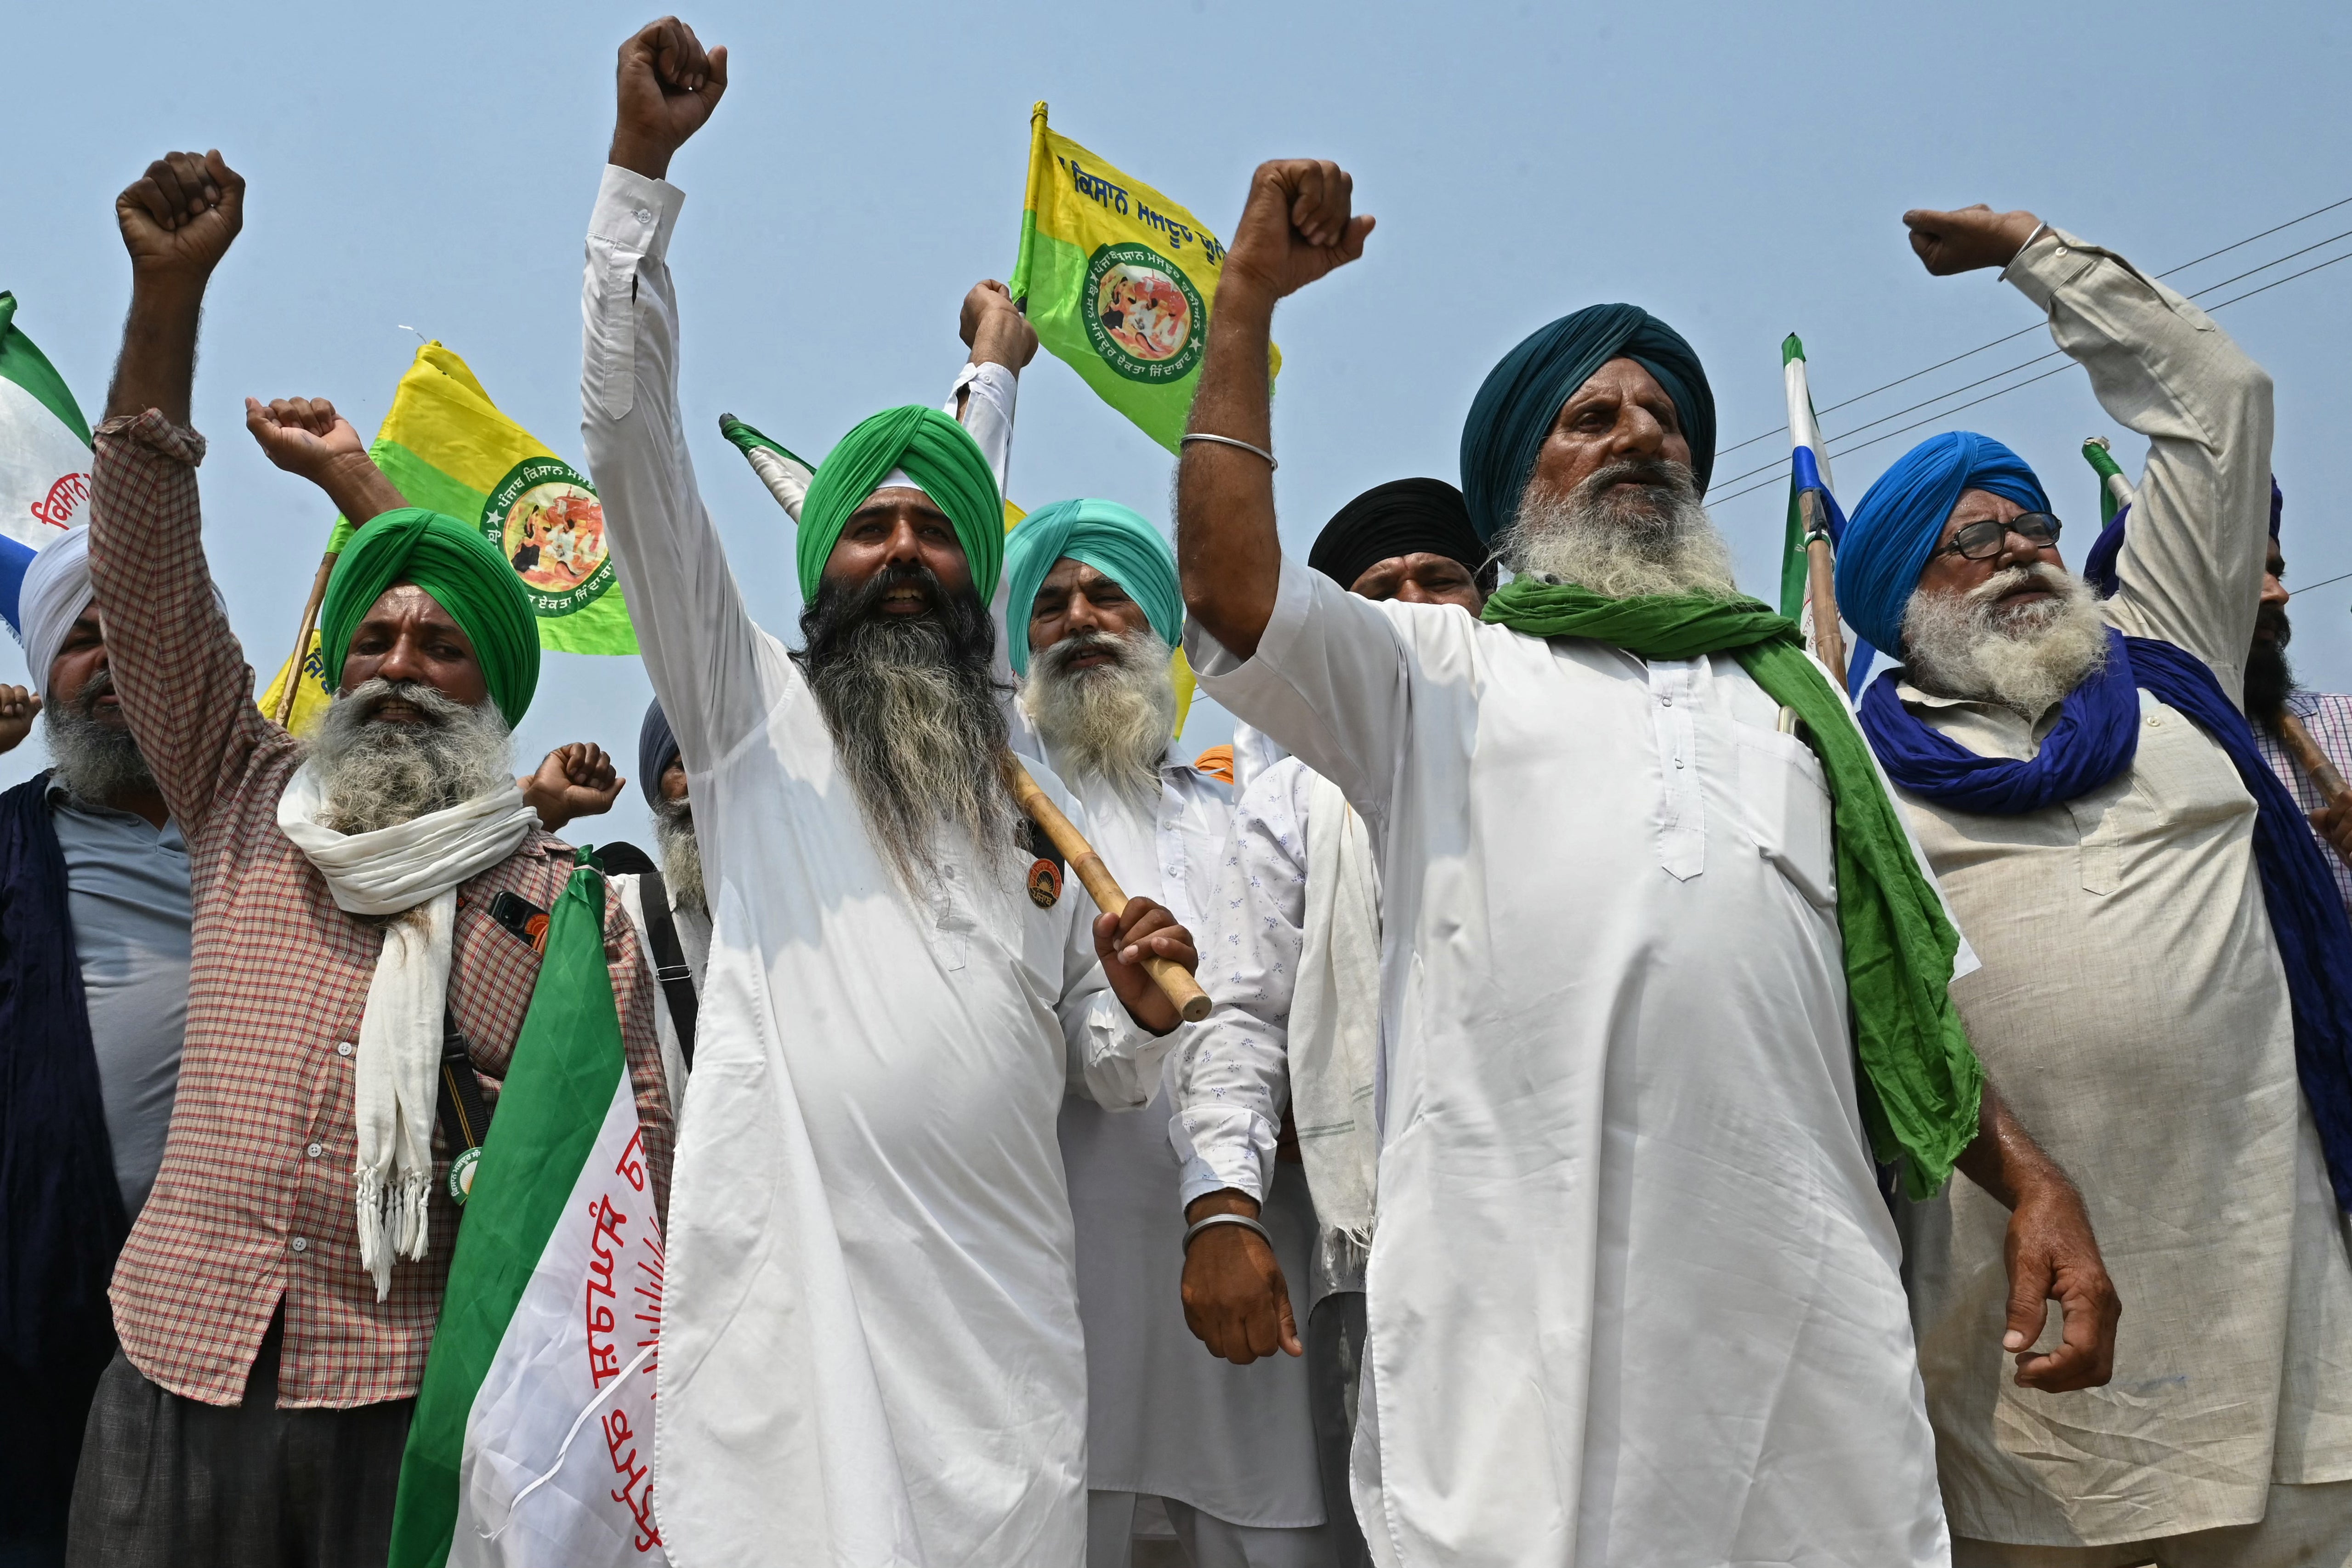 Farmers shout slogans against Modi, during a protest to demand minimum crop prices on the outskirts of Gurdaspur on 24 May